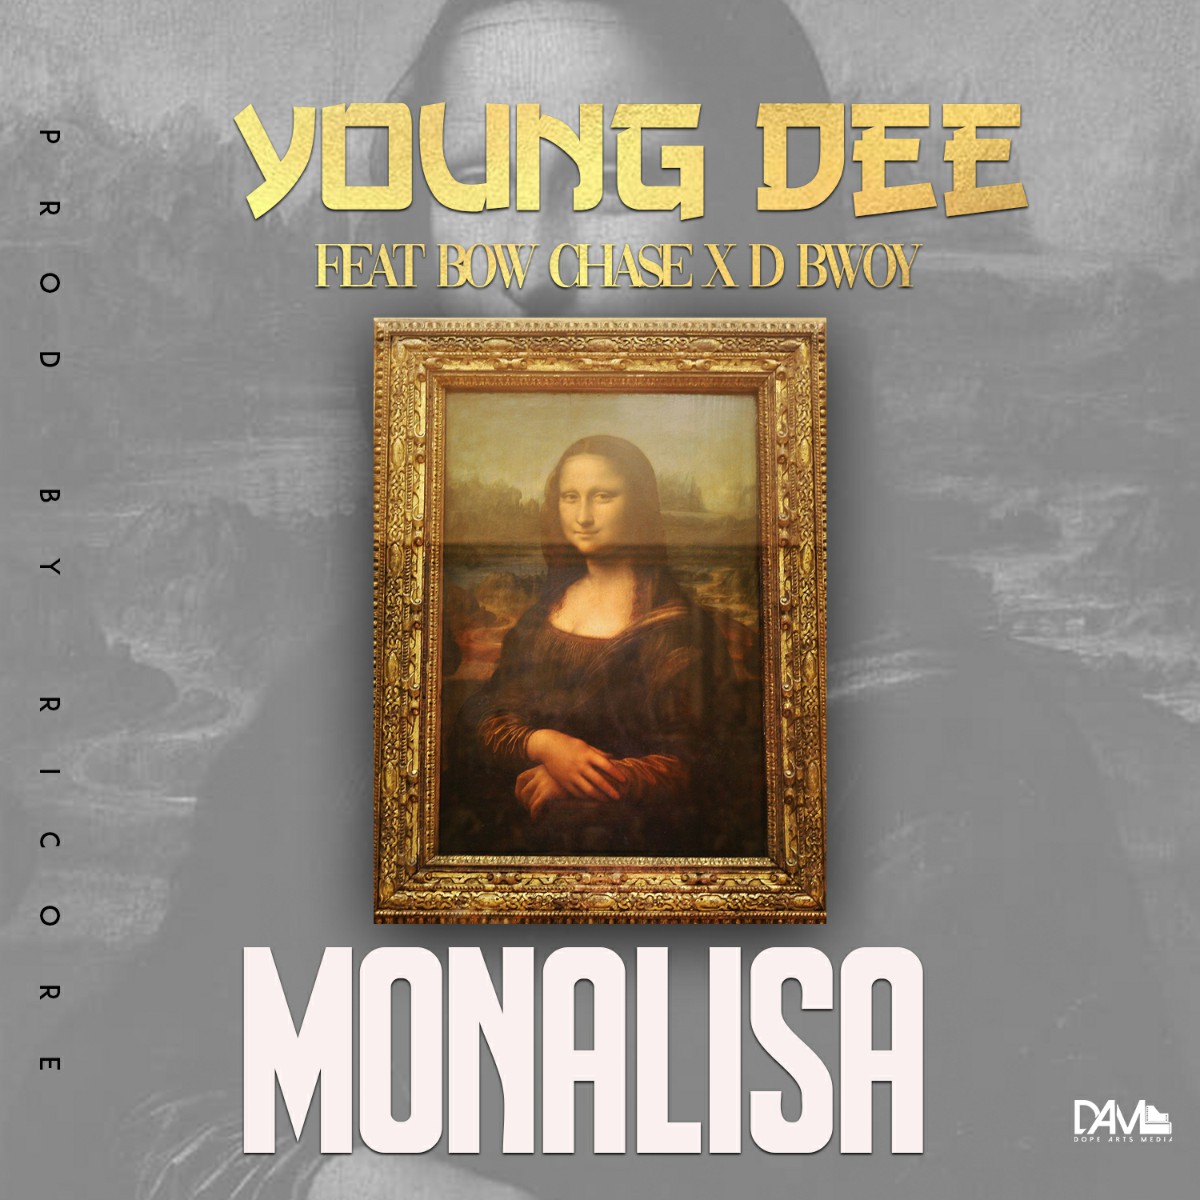 Young Dee ft. Bow Chase & D Bwoy - Monalisa